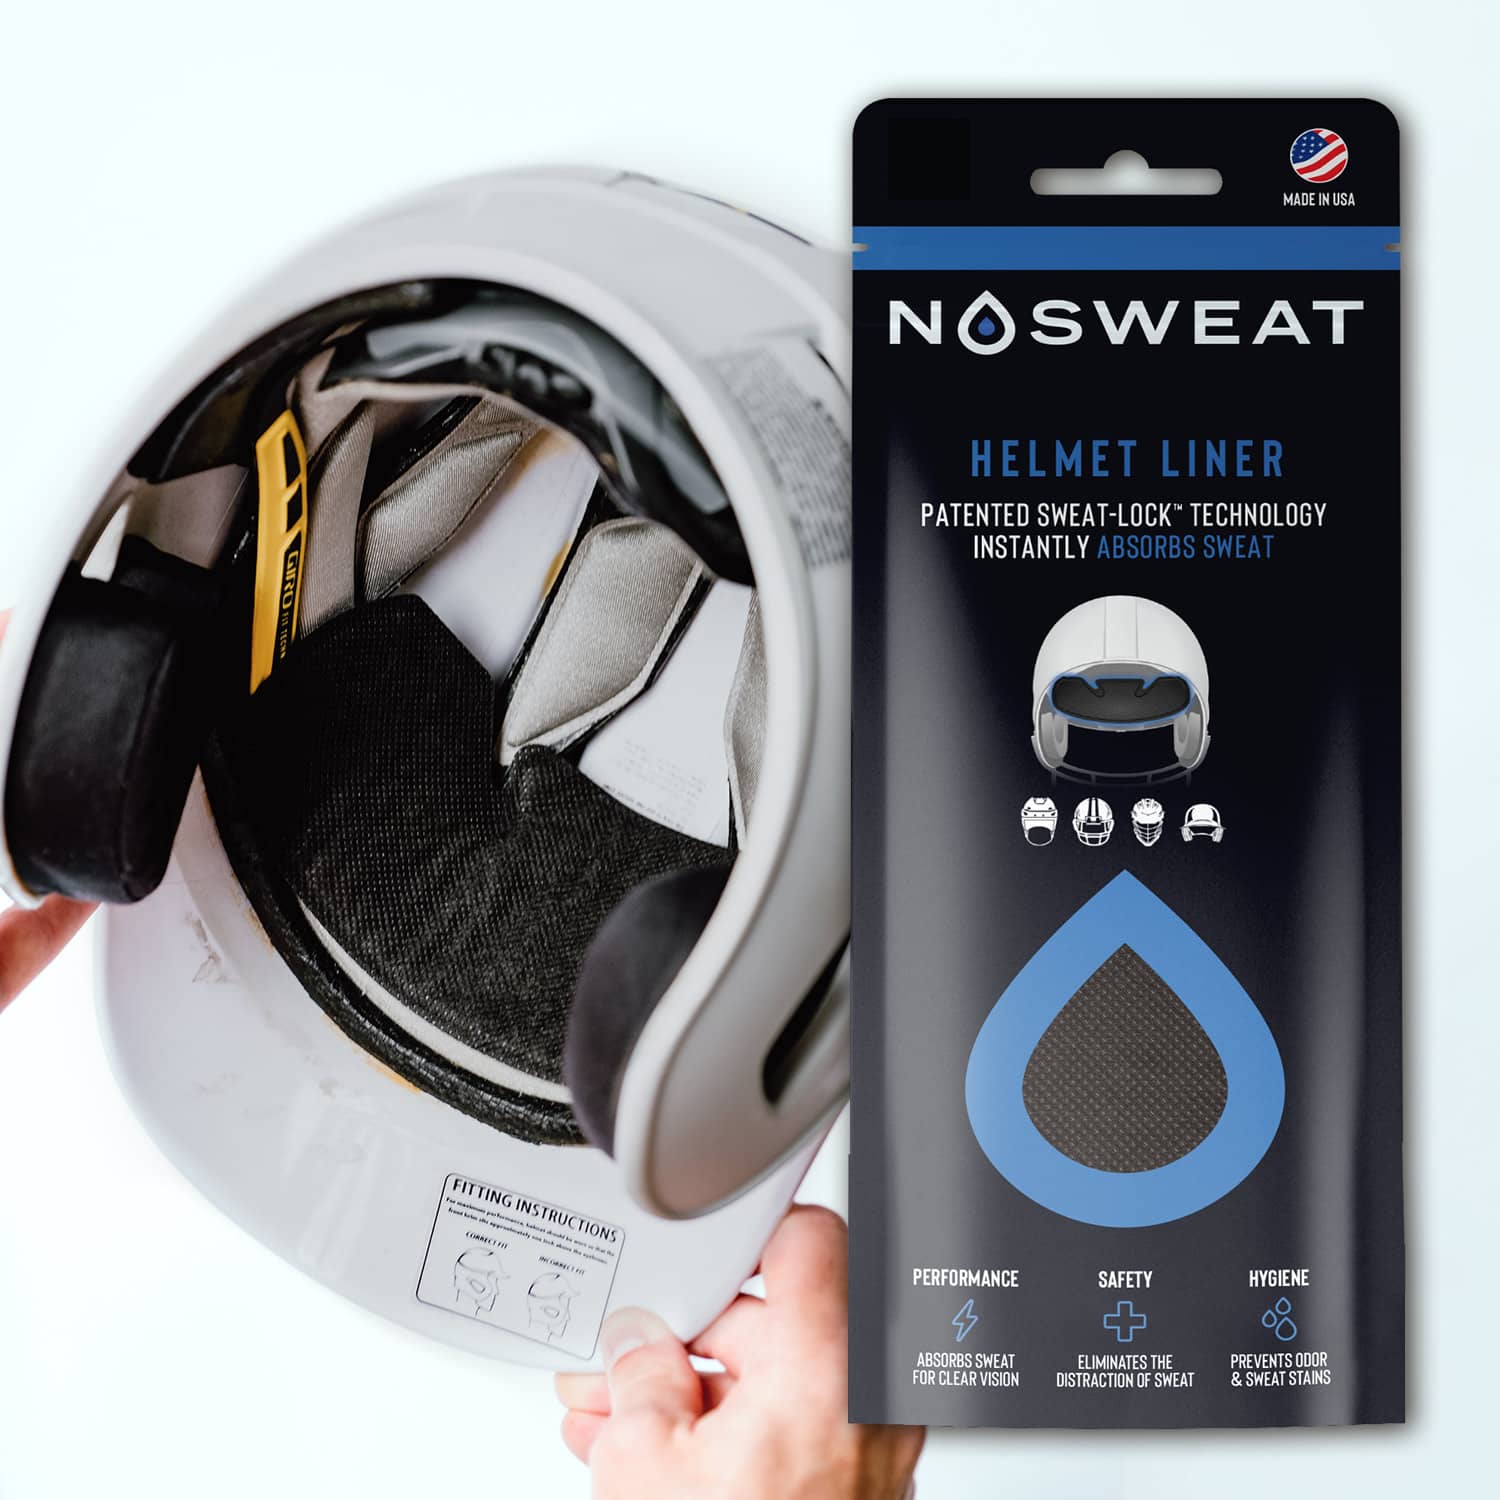 NoSweat Hat Liner keeps sweat our of your eyes